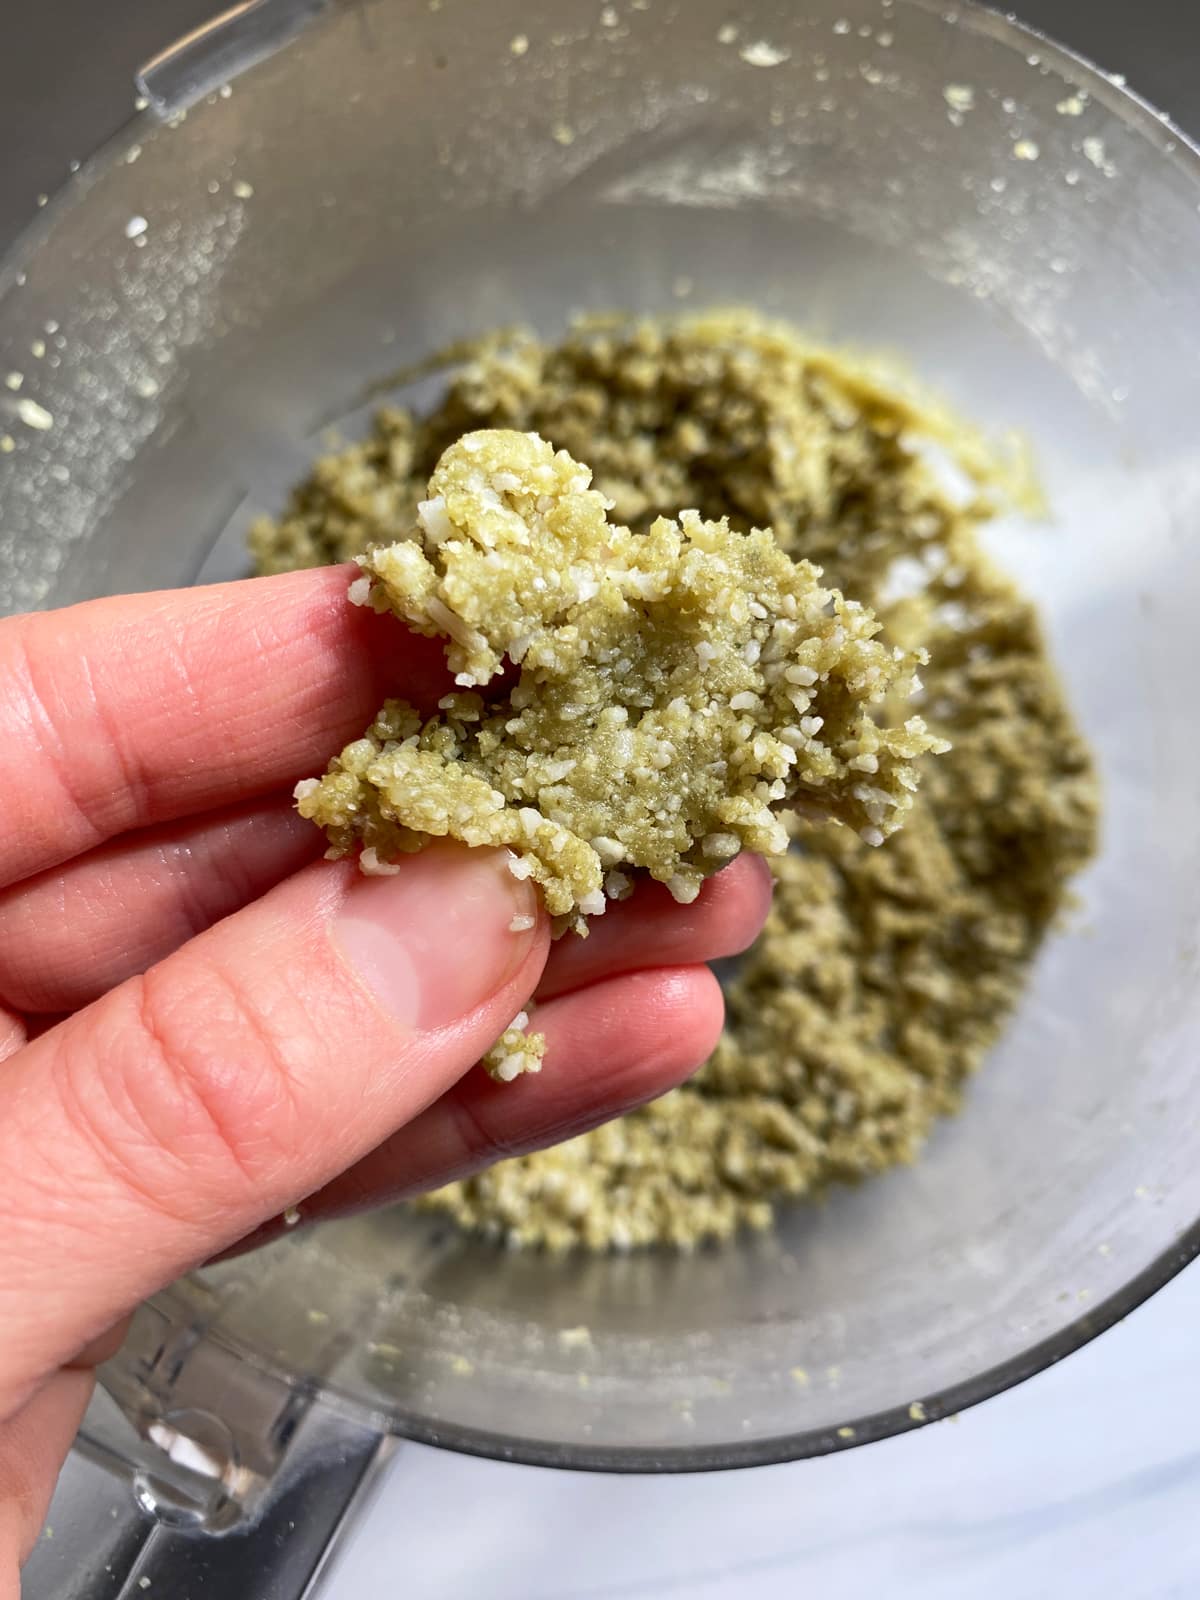 Showing the texture of the dough for the protein balls.